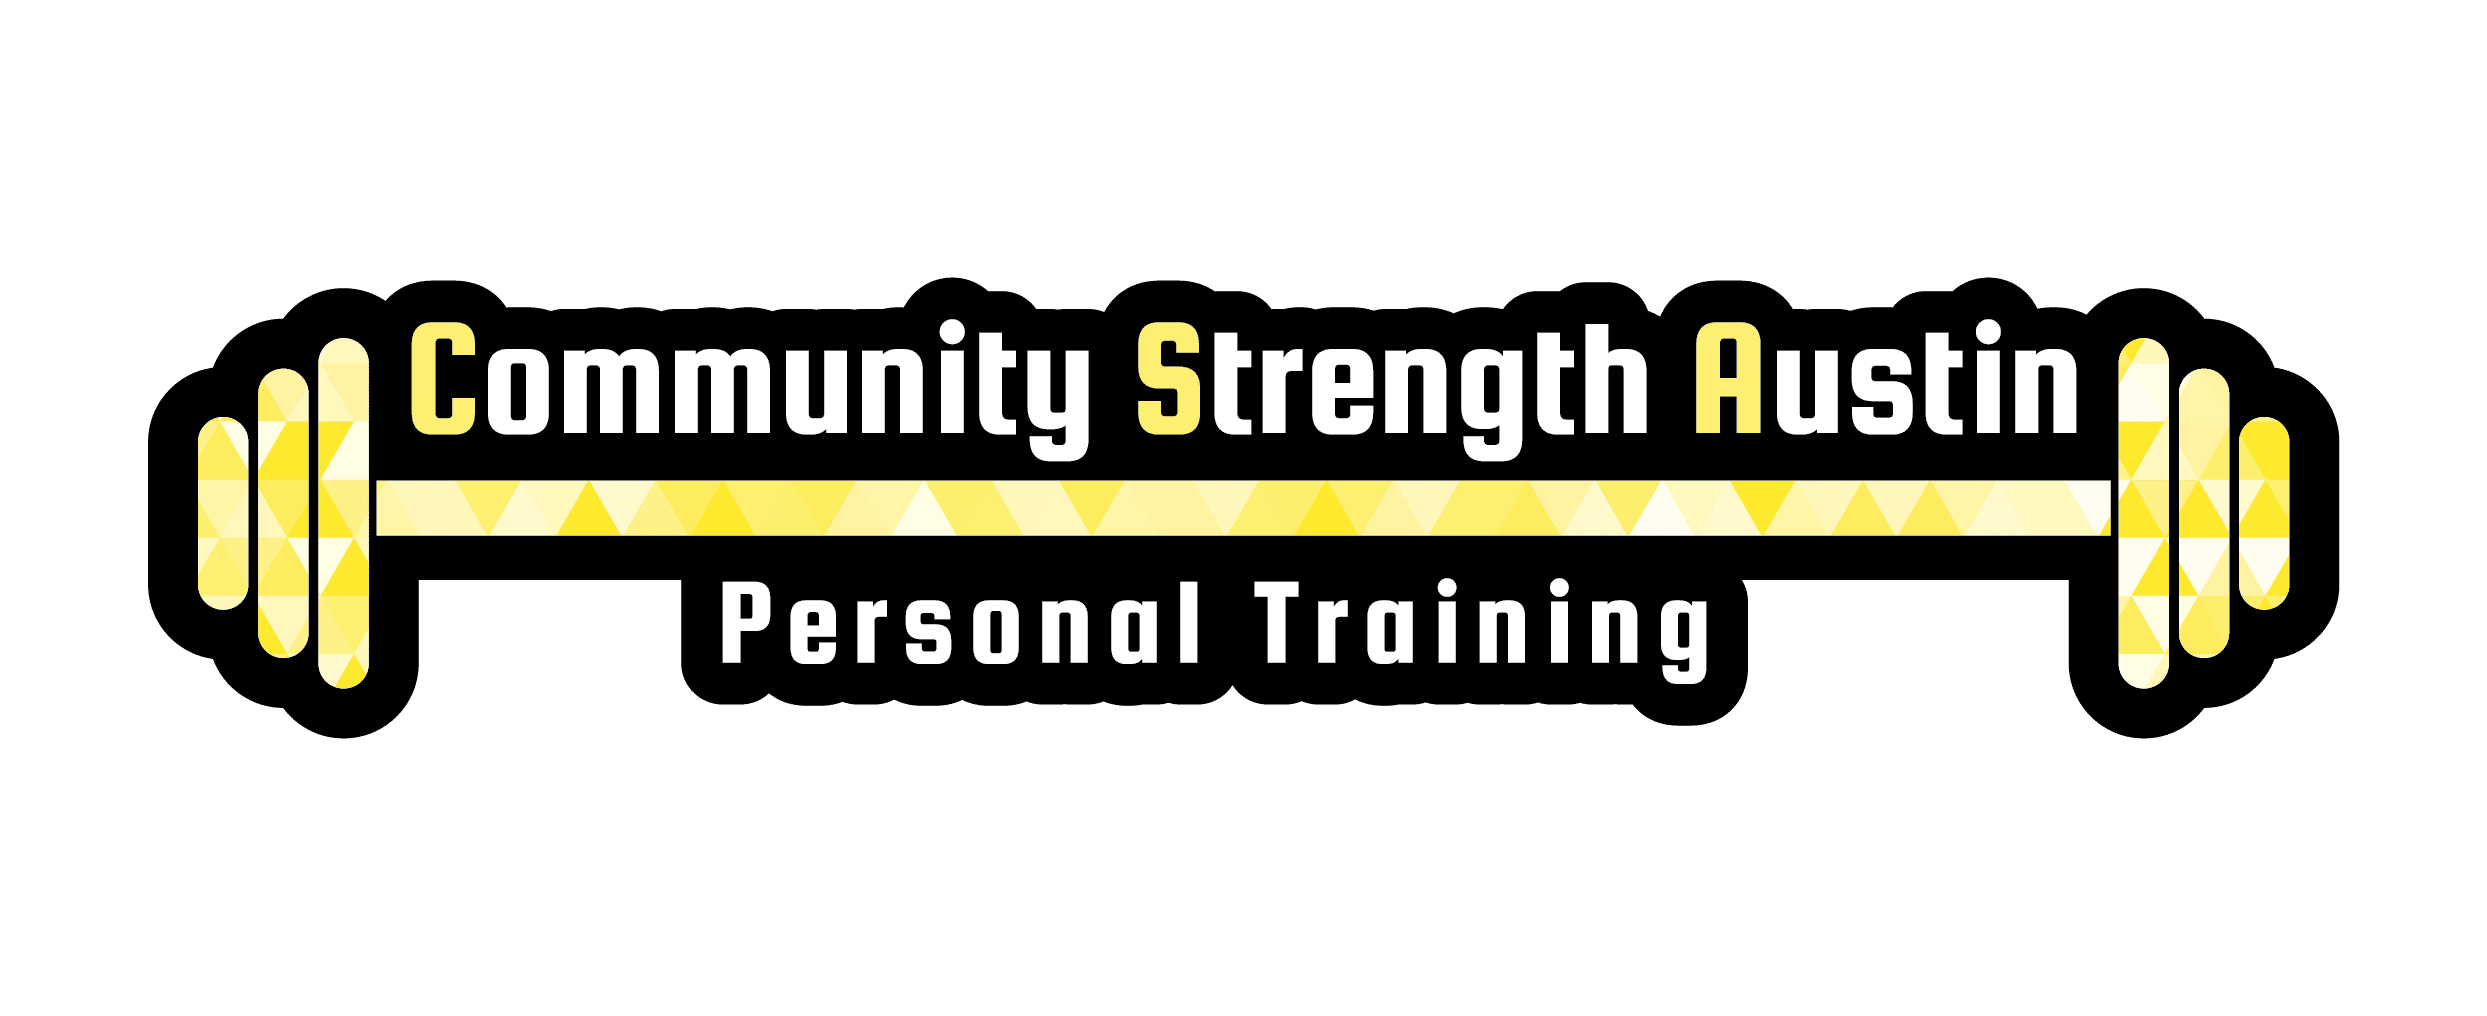 Best Personal Trainer in Austin, Texas. Community Strength Austin - Personal Training